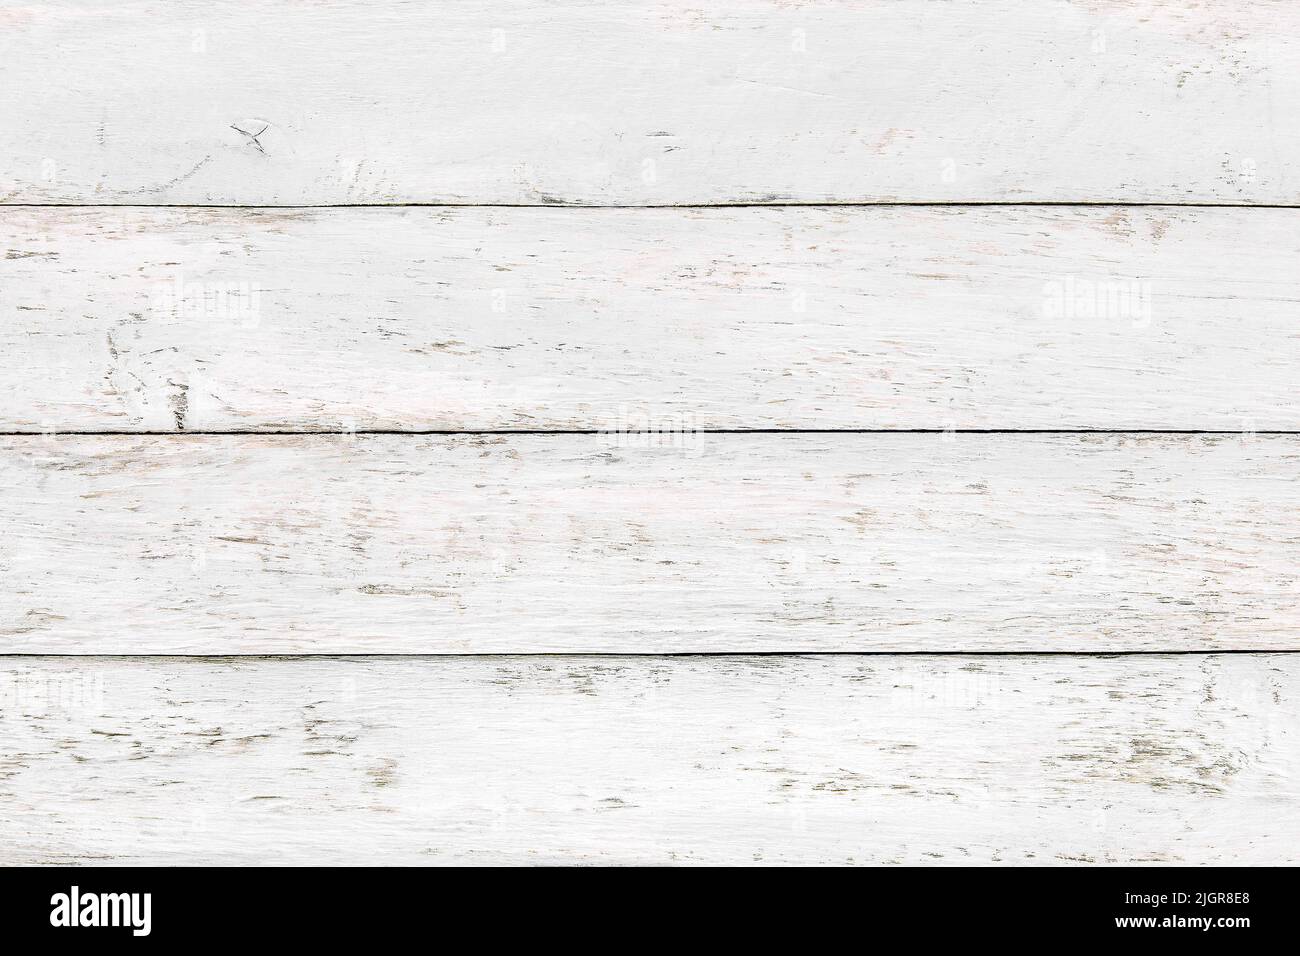 White Washed Wooden Background. Distressed Weathered Wood Texture Stock Photo